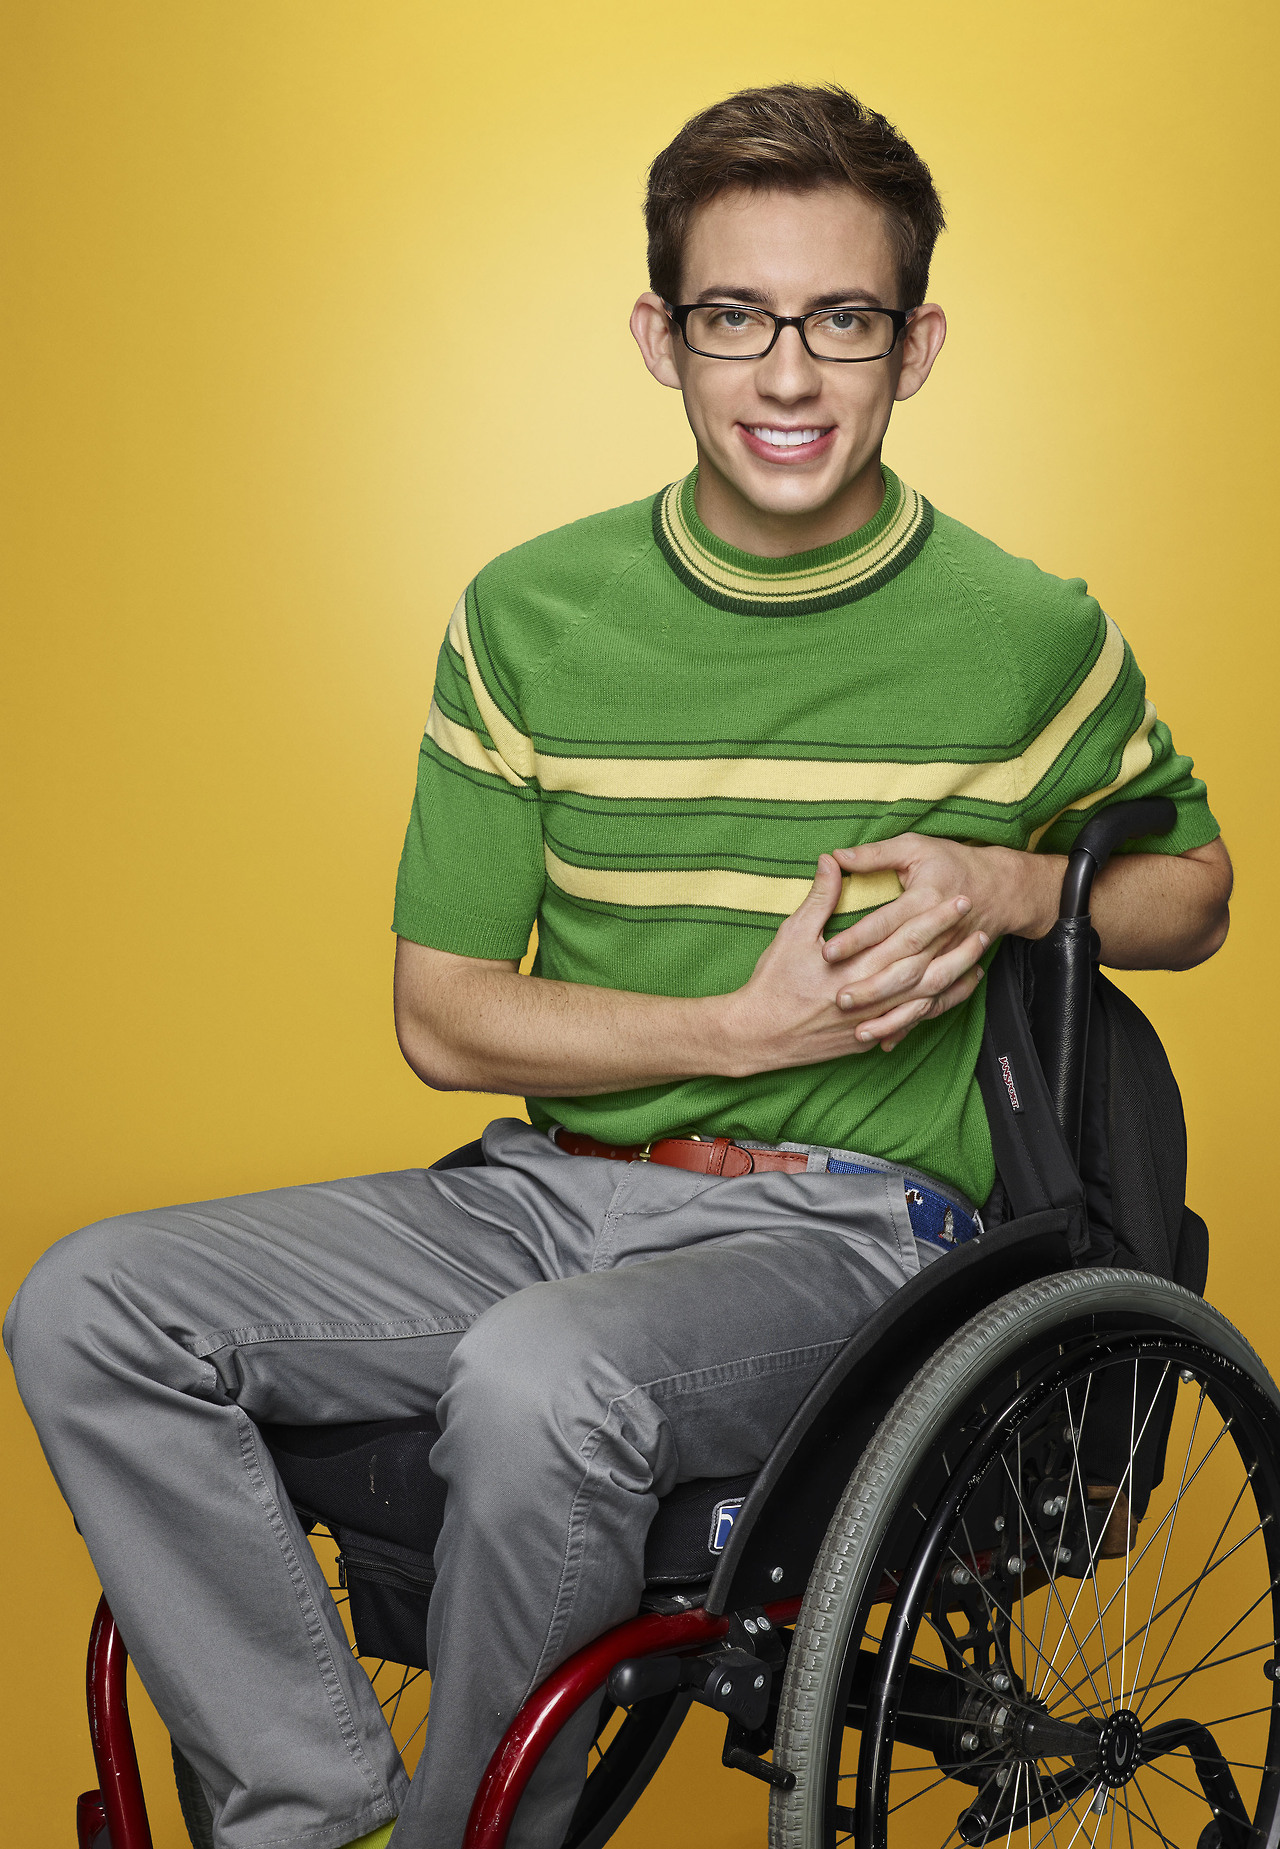 Kevin McHale, Other Cast Members Speak Out About 'Trash' Glee